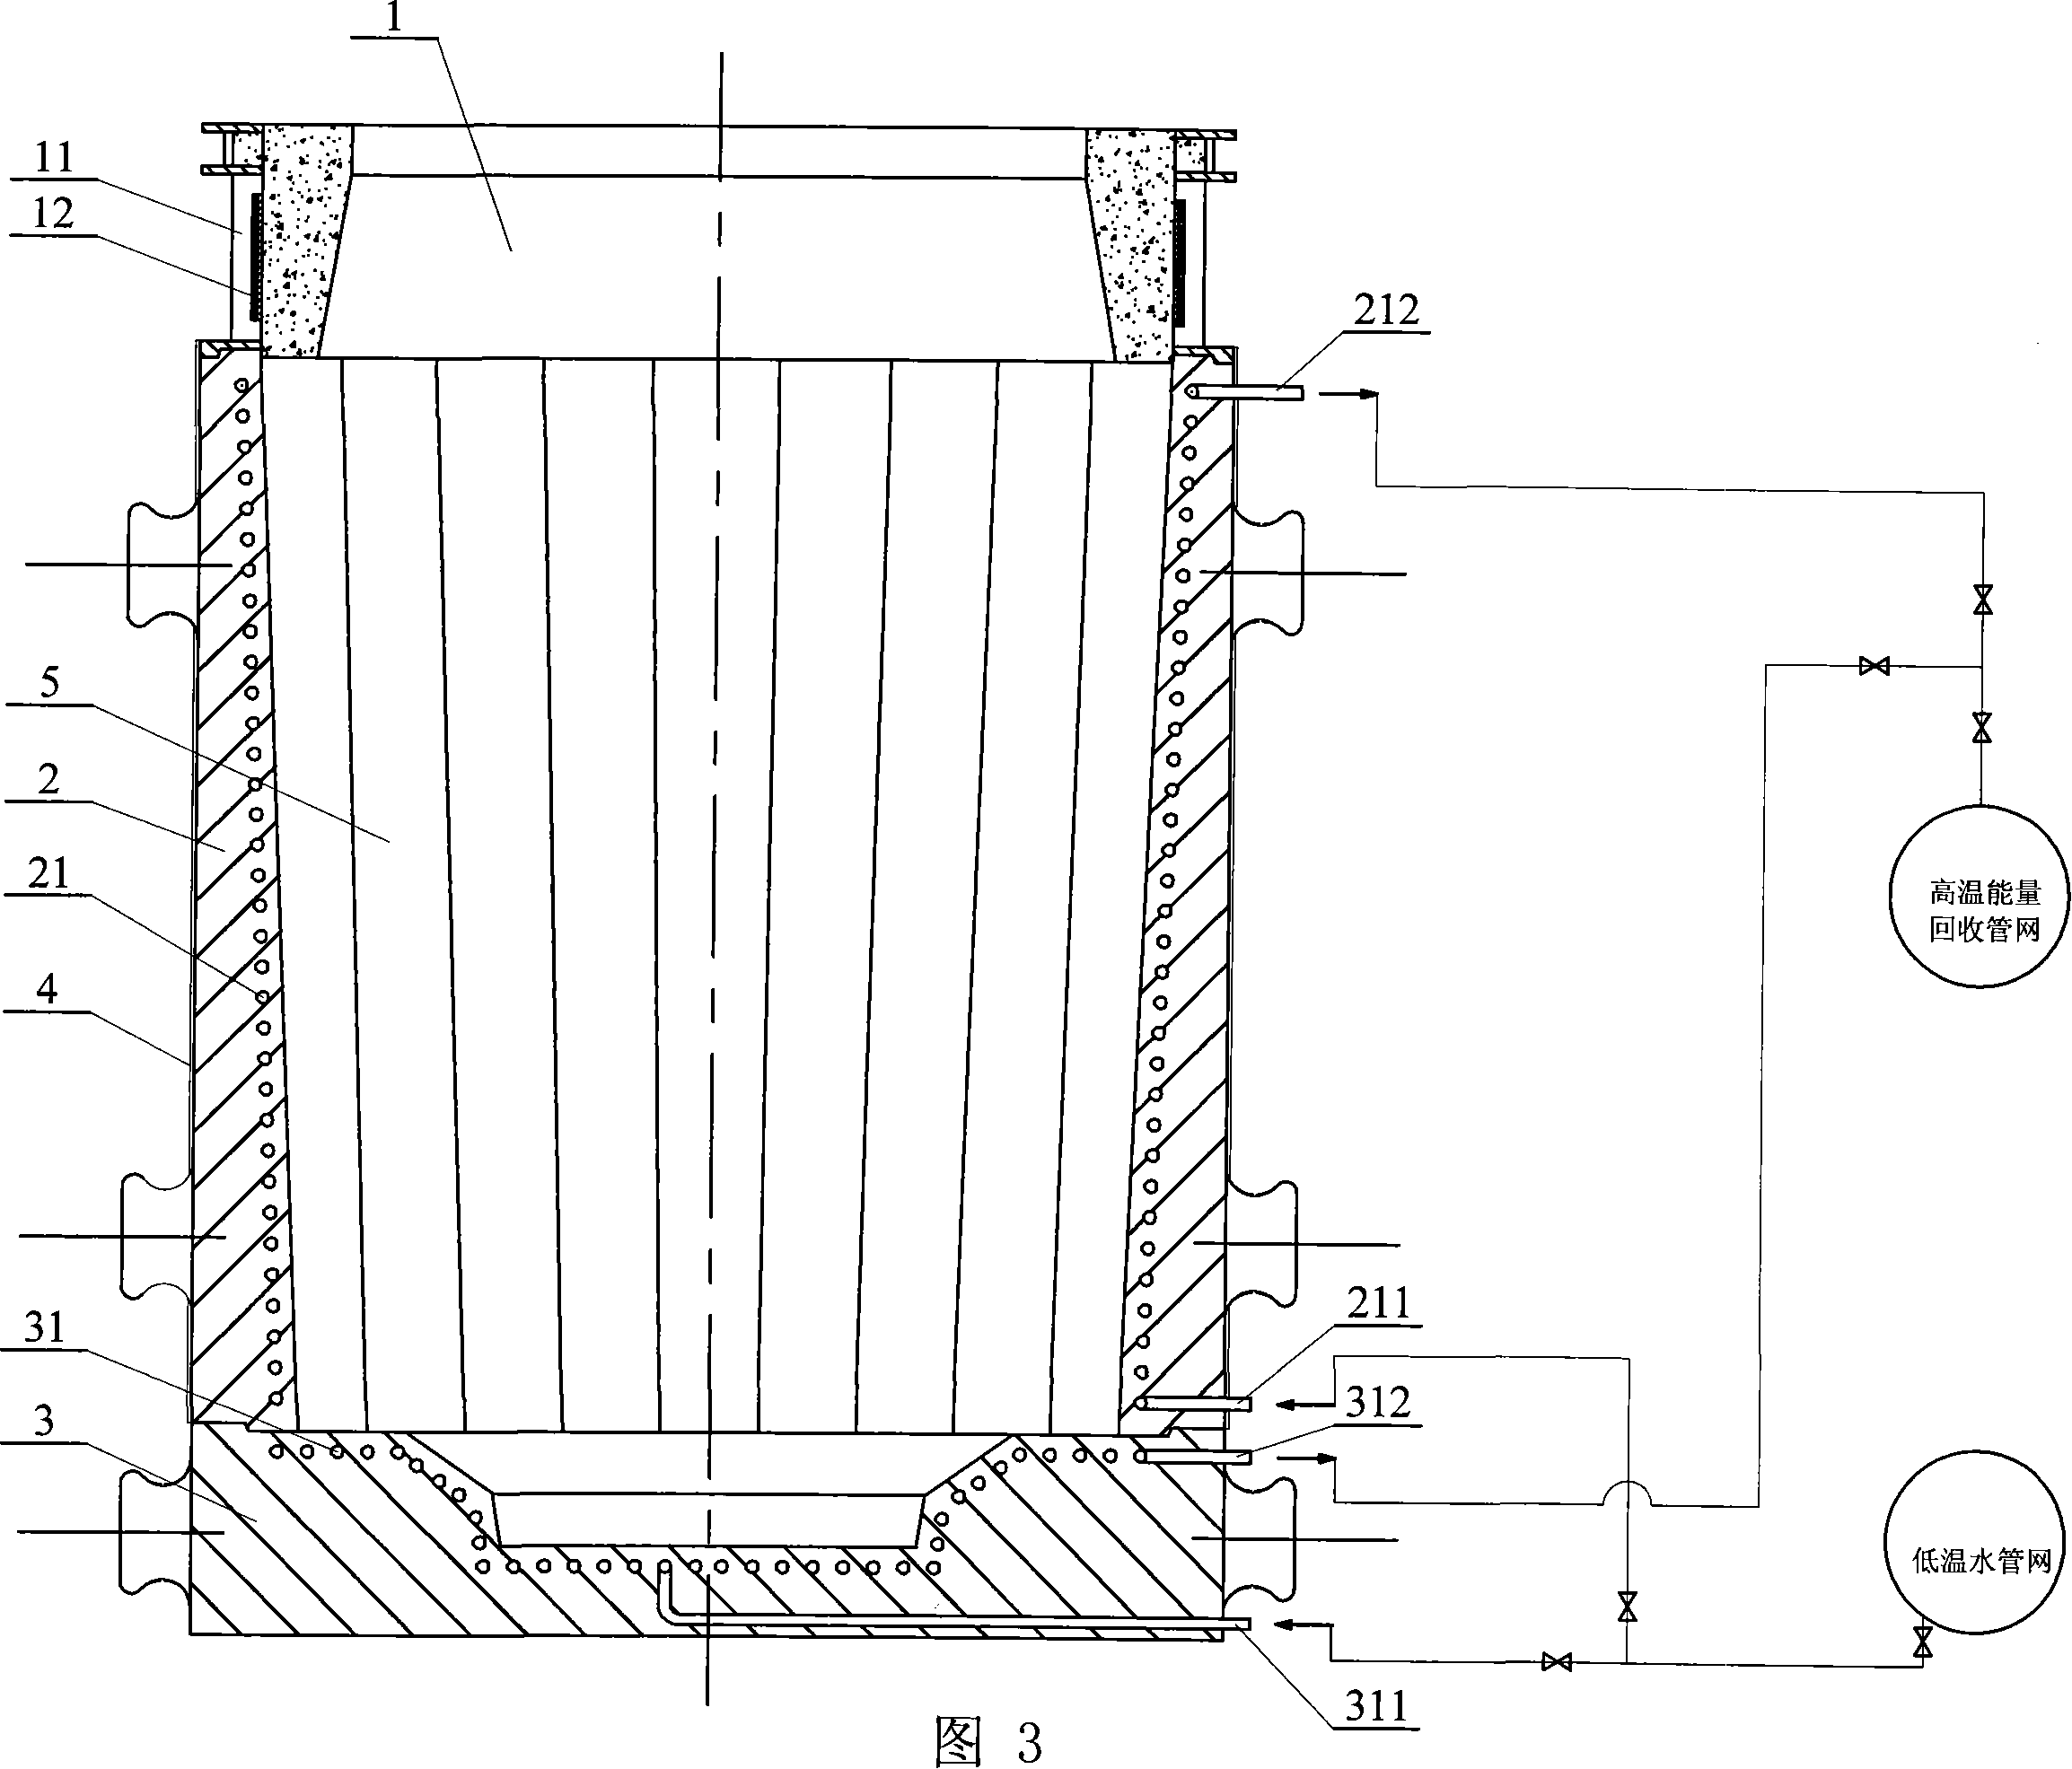 Macrotype metal mold system for recovering thermal energy by cooling water